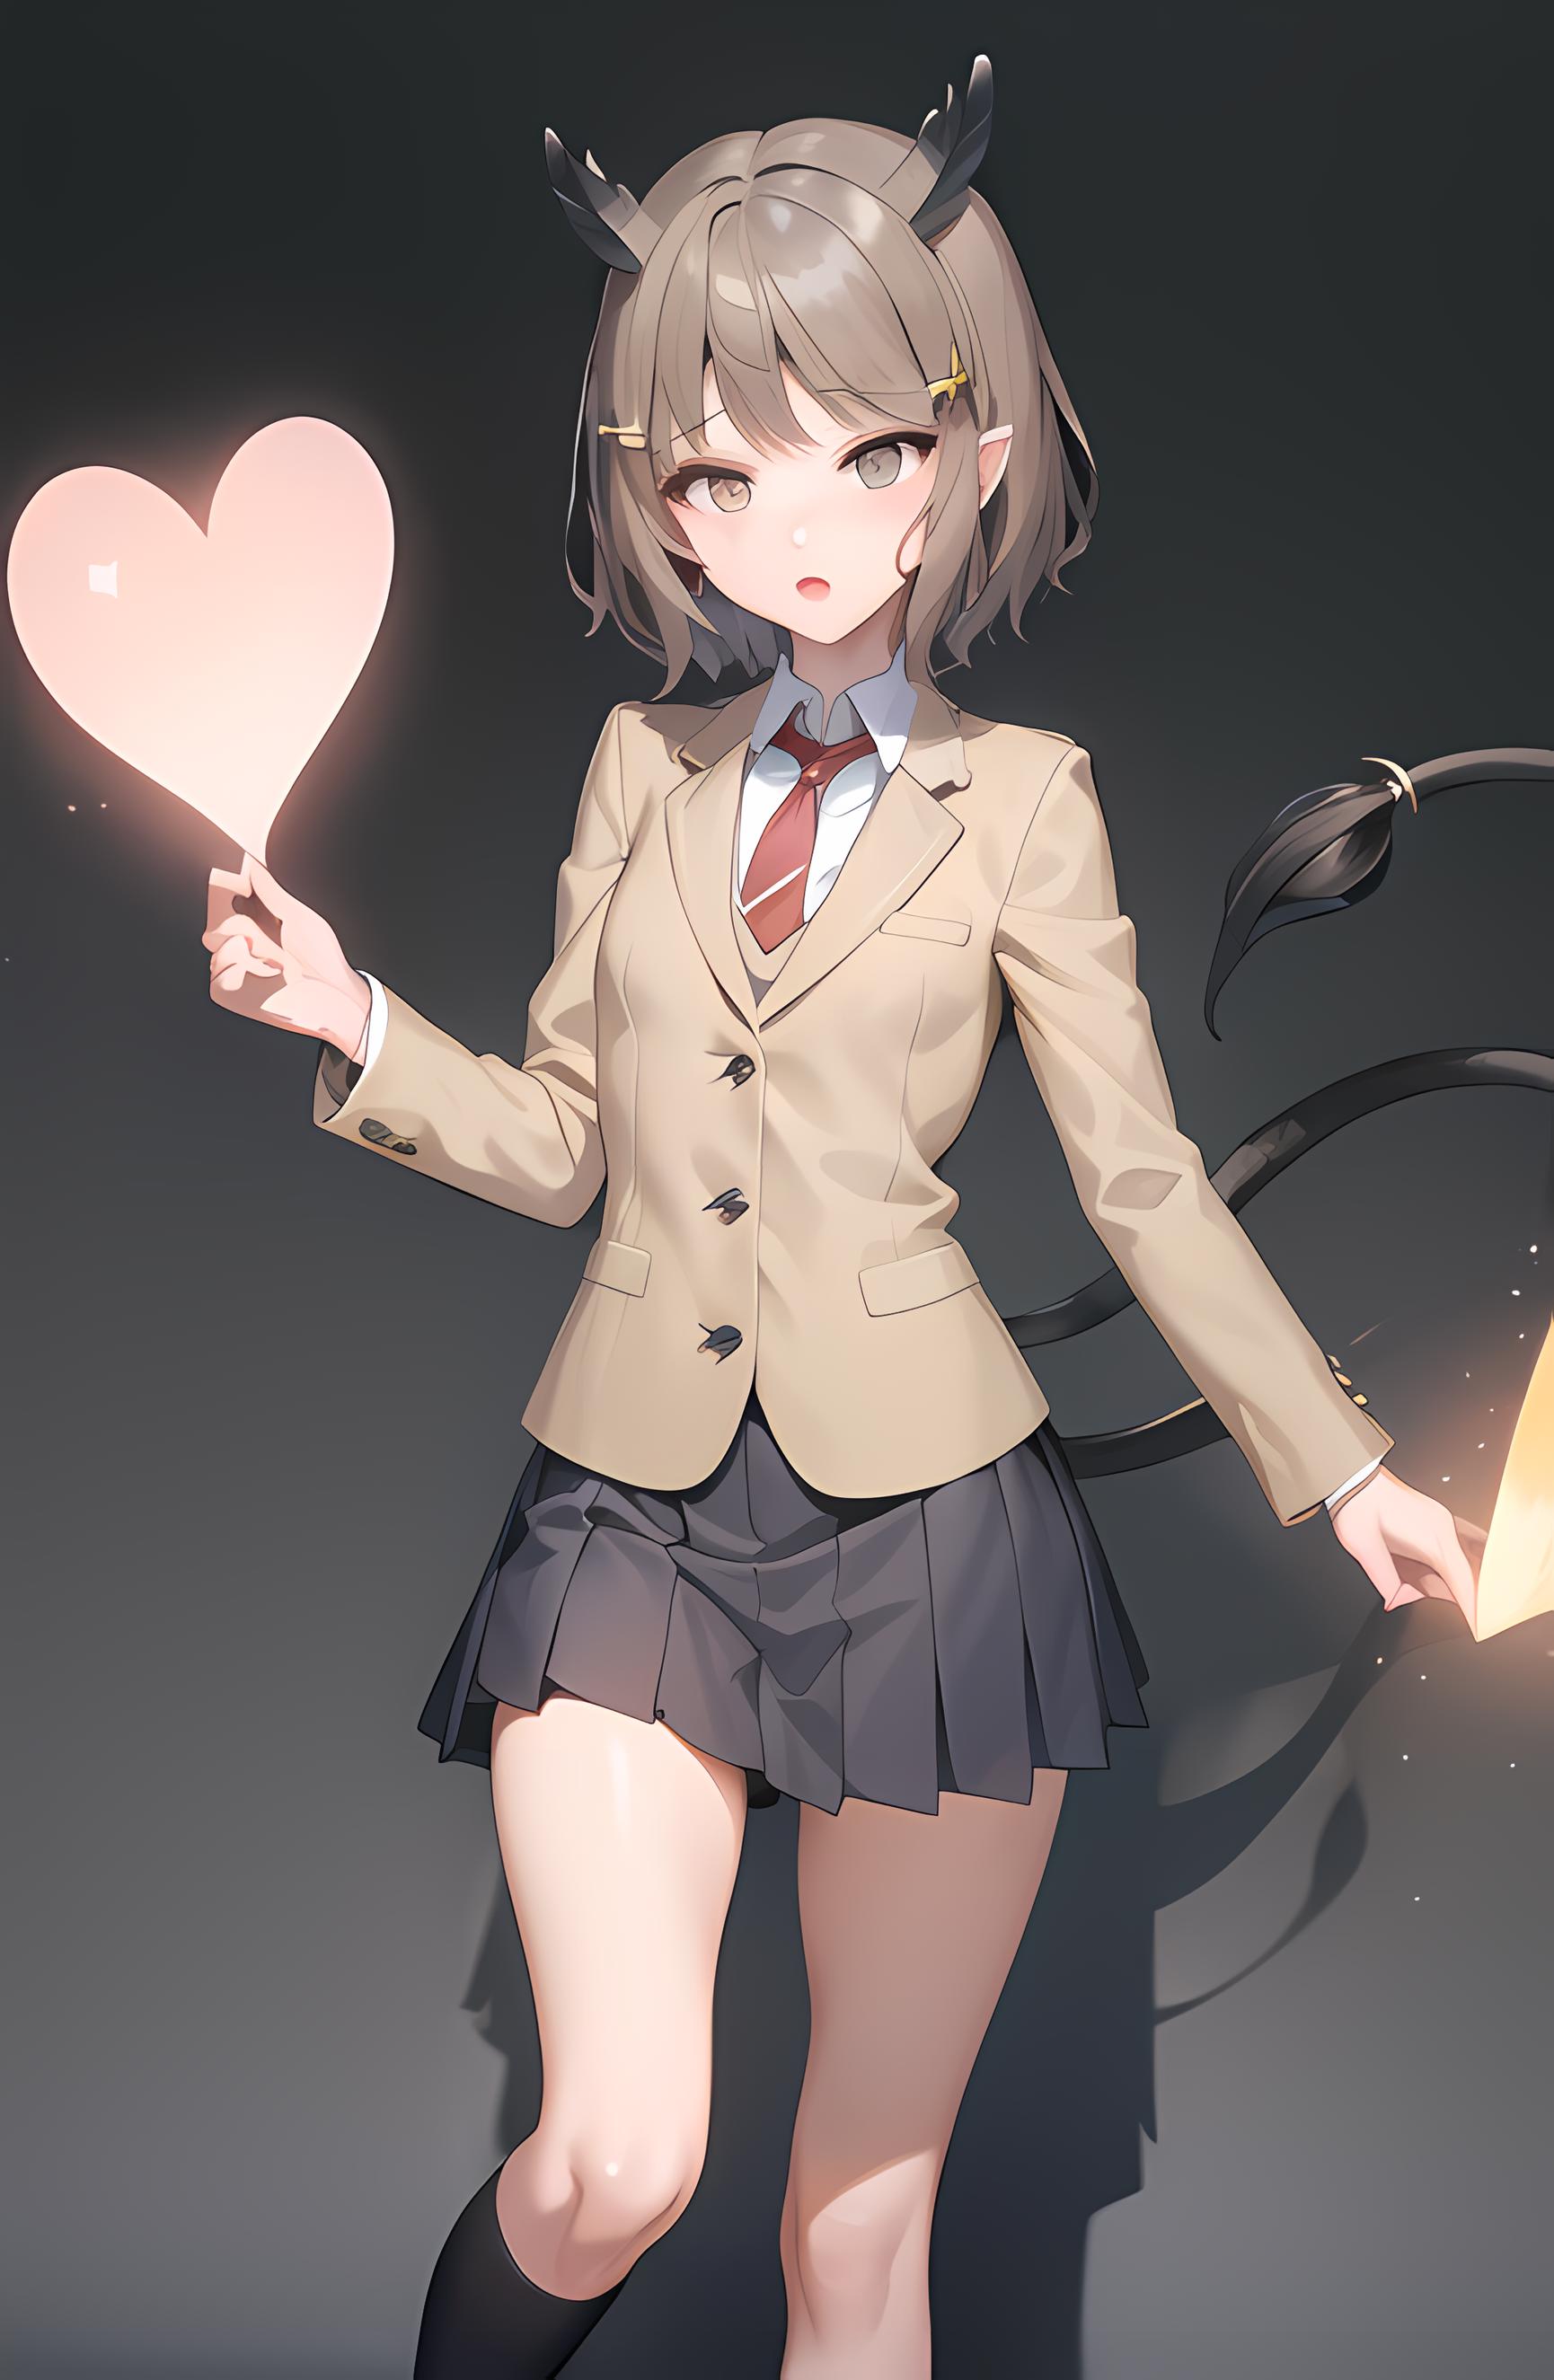 Koga Tomoe (From Bunny Girl Senpai) image by BlacNec